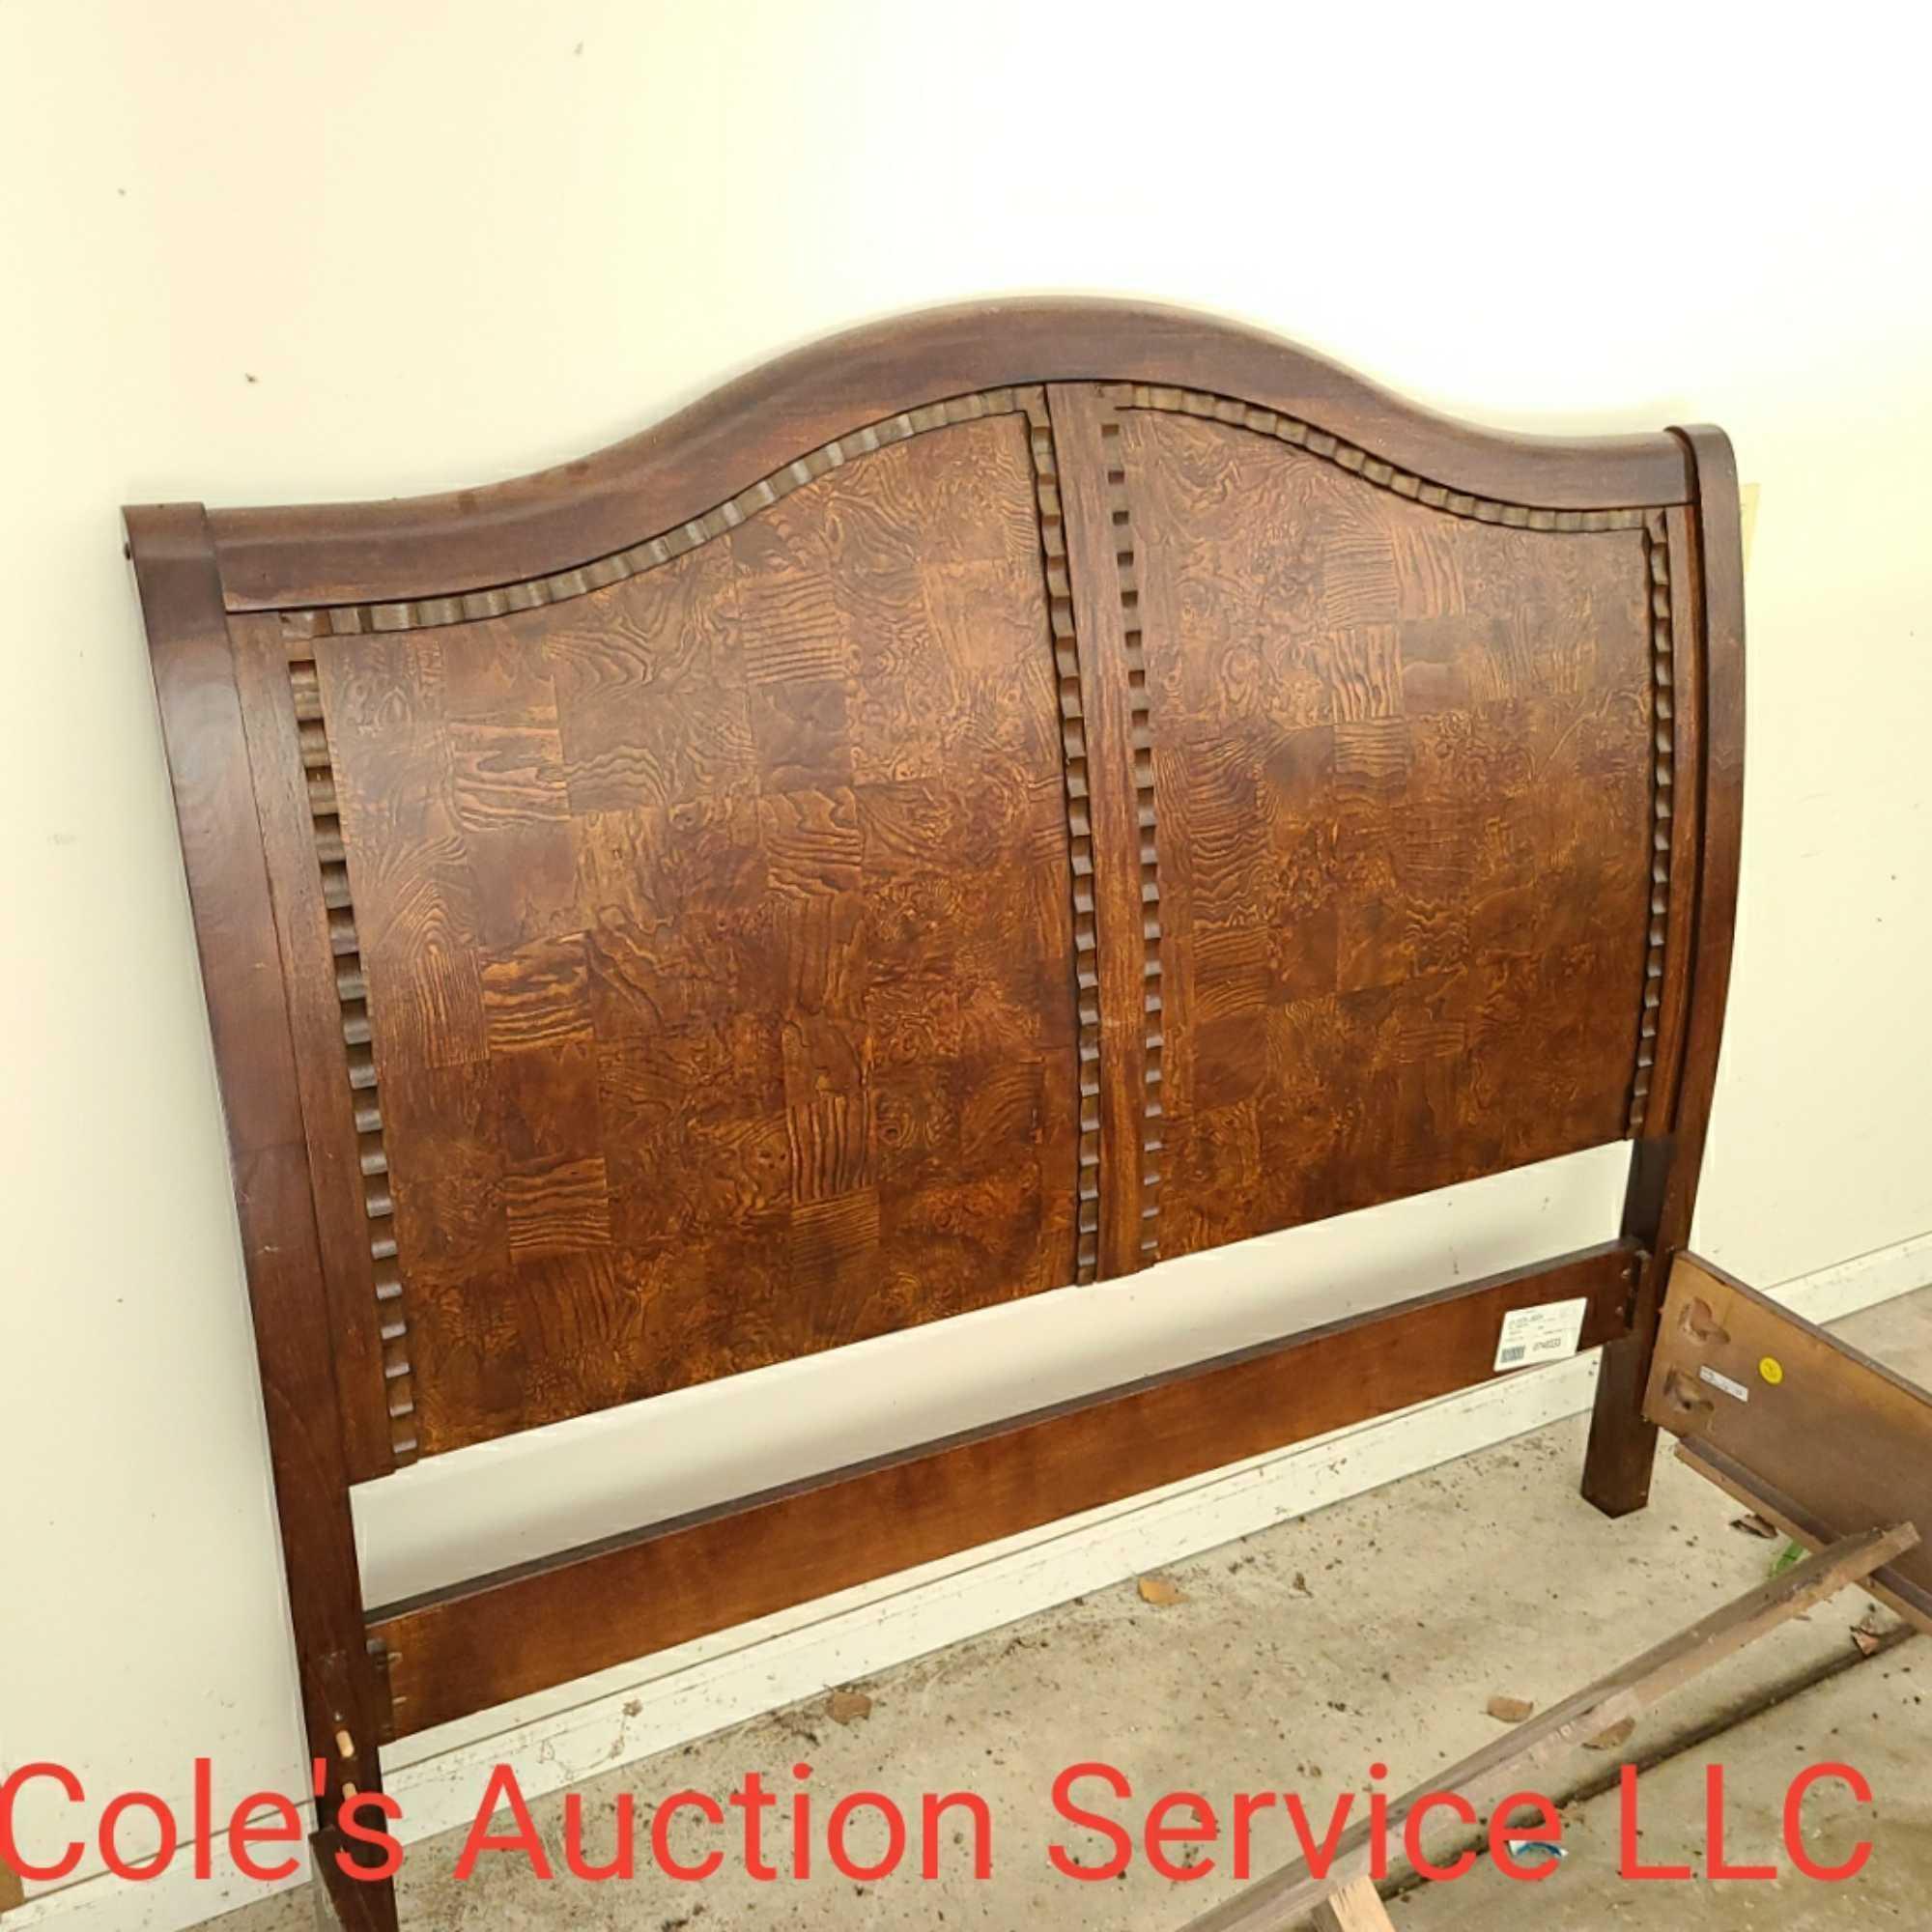 Queen-size sleigh bed in good condition. See photos for details.